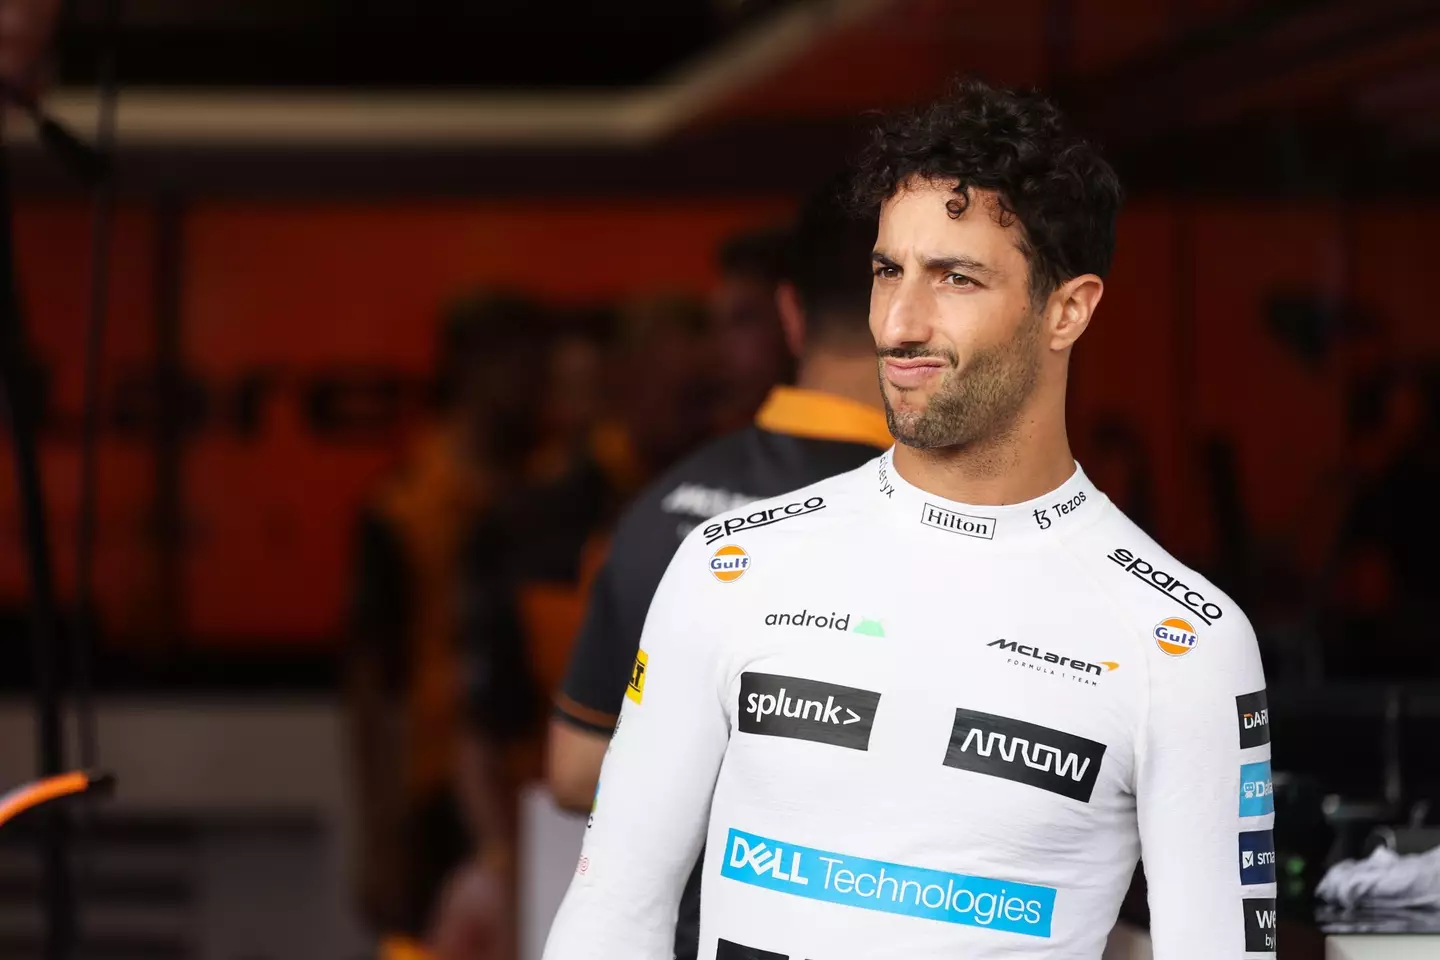 This season has been much tougher for Ricciardo. Image: Alamy